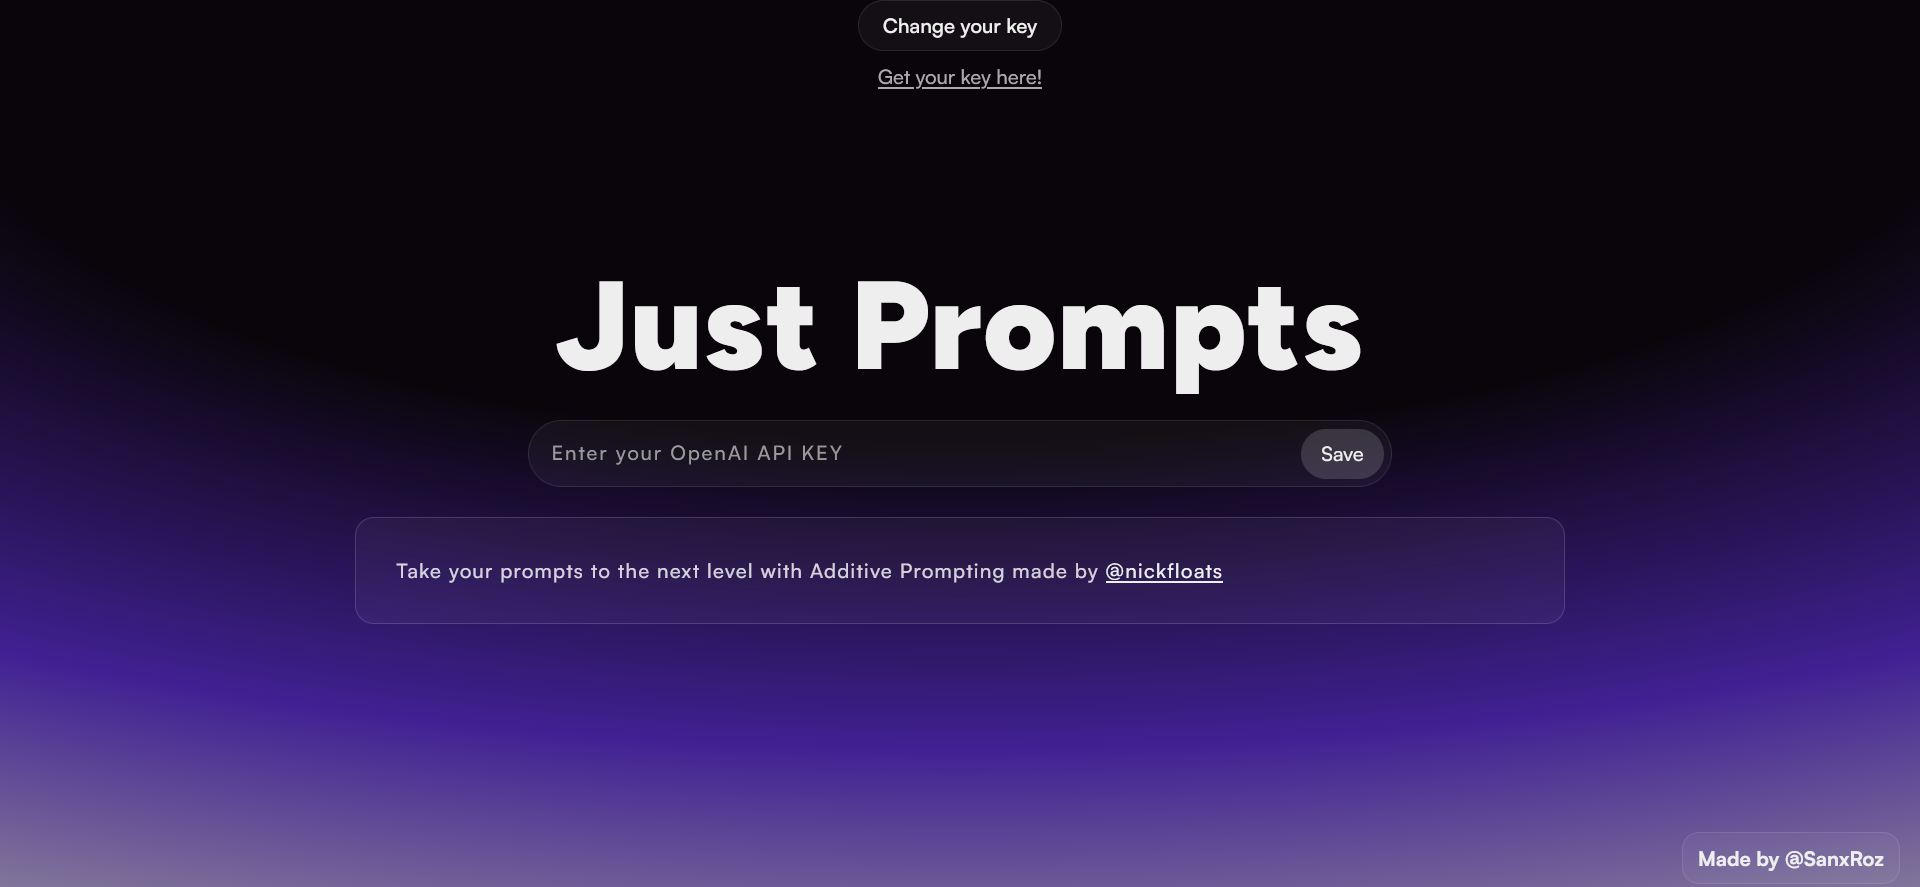 Post: Just Prompts